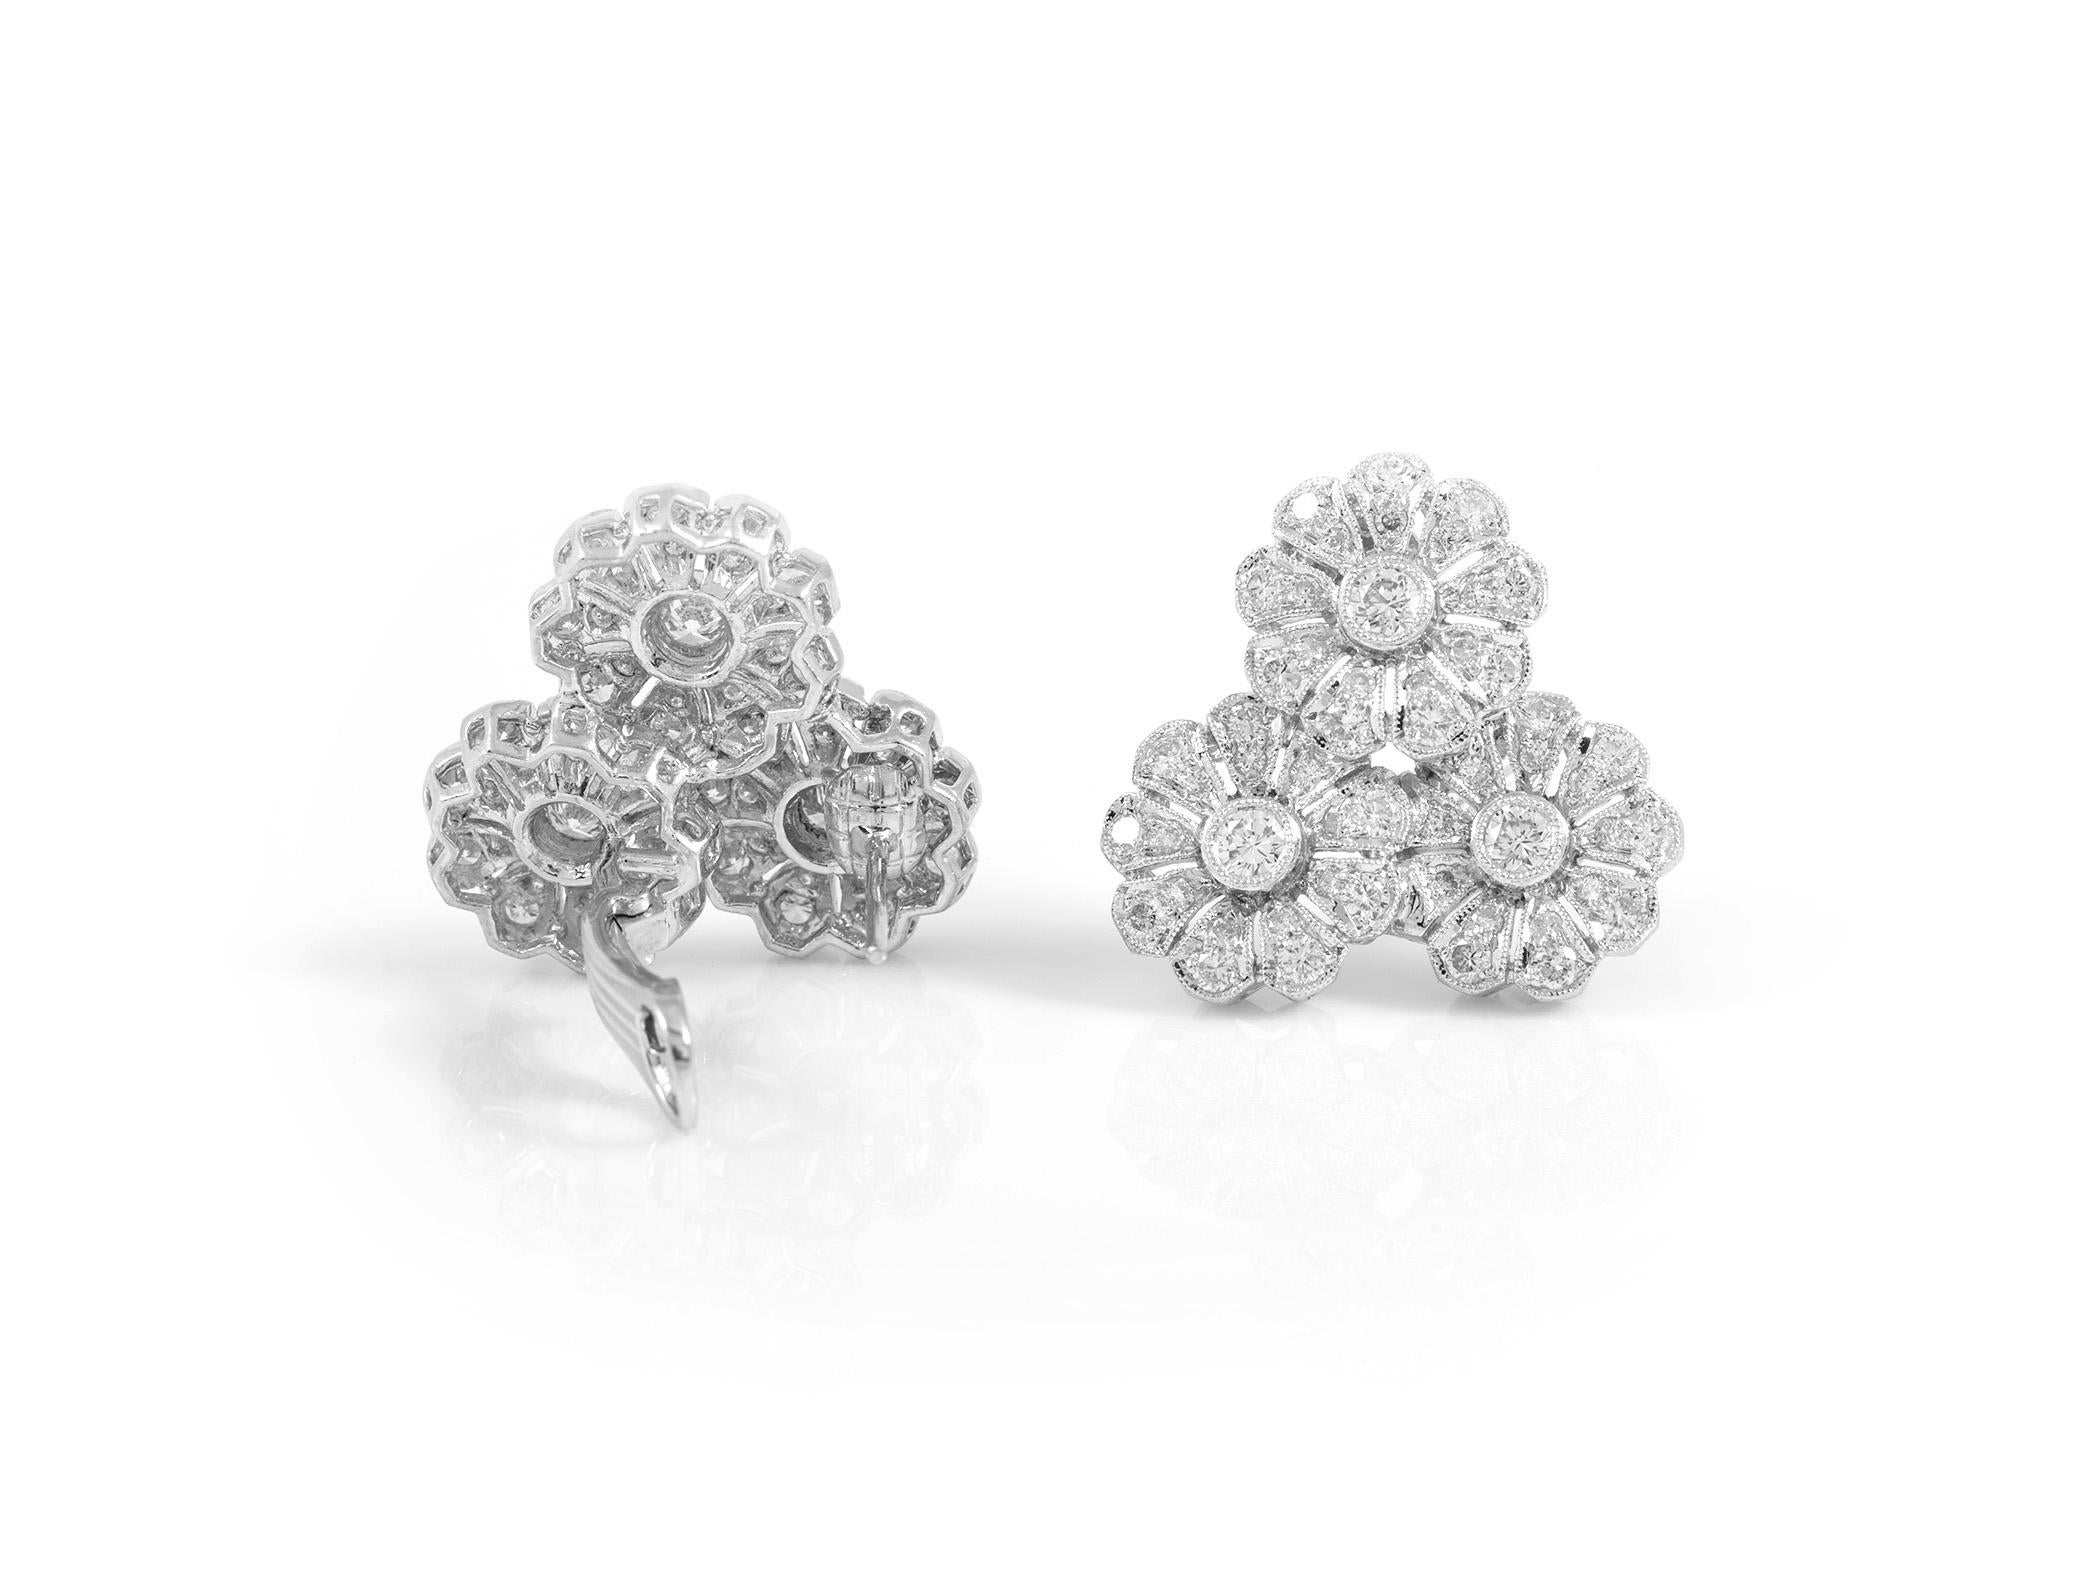 The earrings are finely crafted in platinum with diamonds weighing approximately total of 4.28 carat.